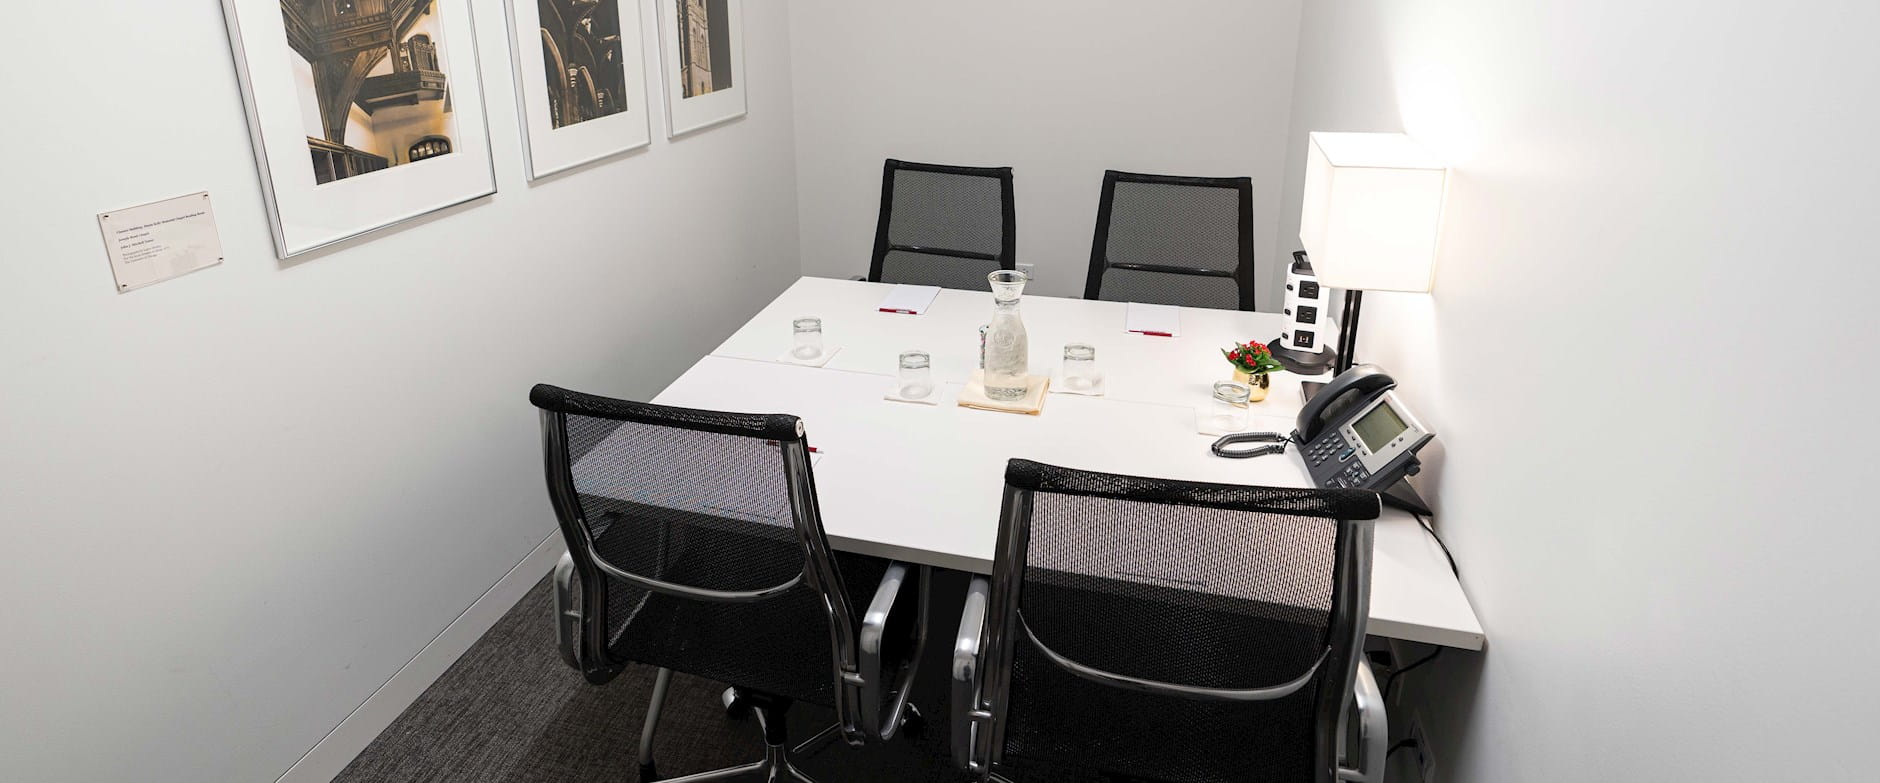 Small executive board room with 4-person table set with water, notepads, and outlets